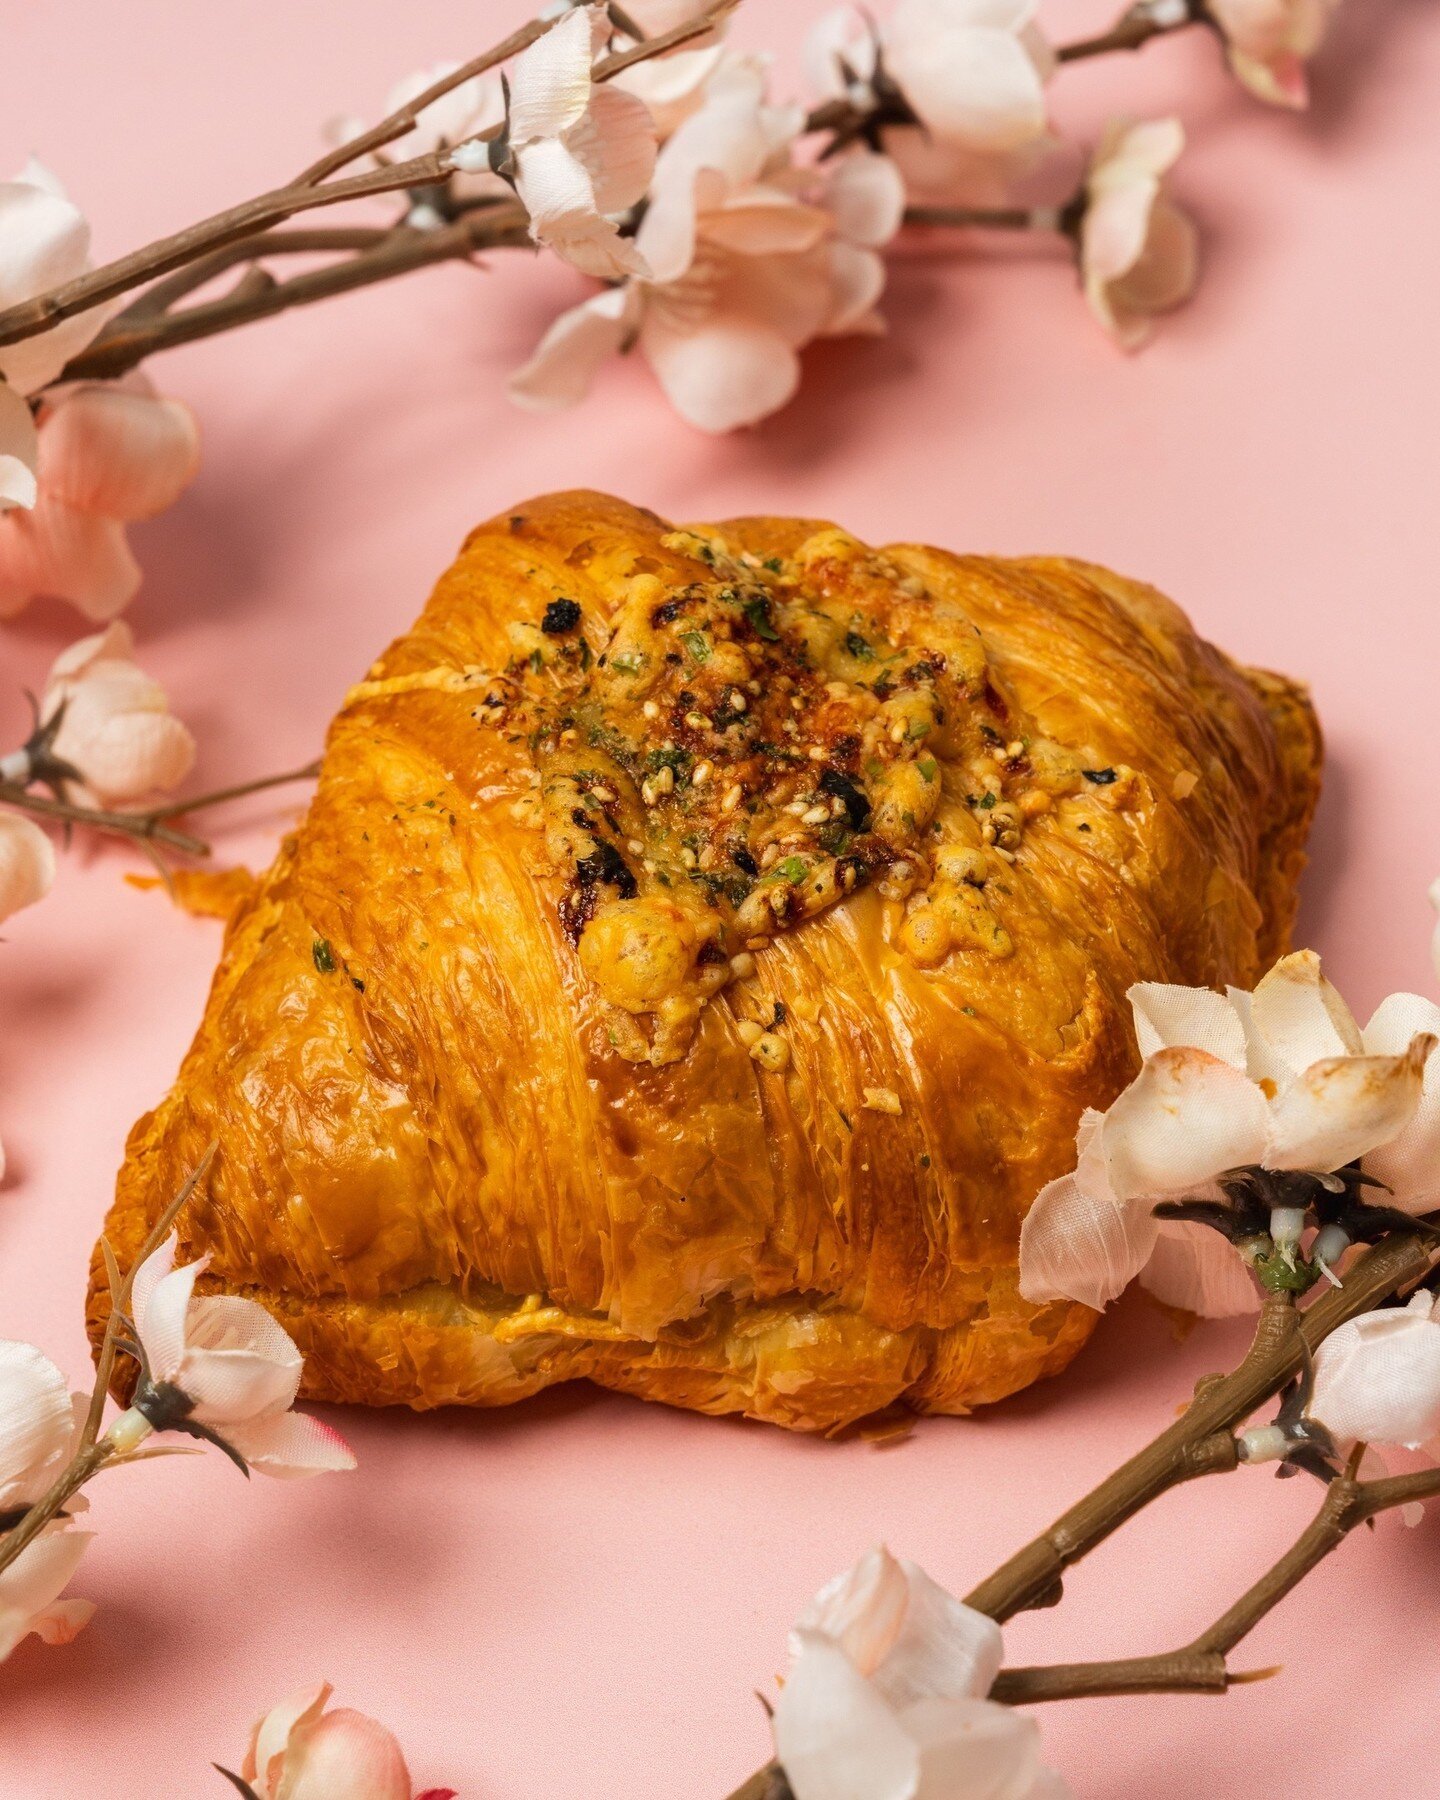 Our Hanami Collection is in full bloom ~ Cheese Ramen Croissant⁠ with ramen noodles, creamy bechamel, butter shoyu corn, gruyere and cheddar.⁠
⁠
#yvreats #vancouverfoodie #dishedvan #hanami #croissant